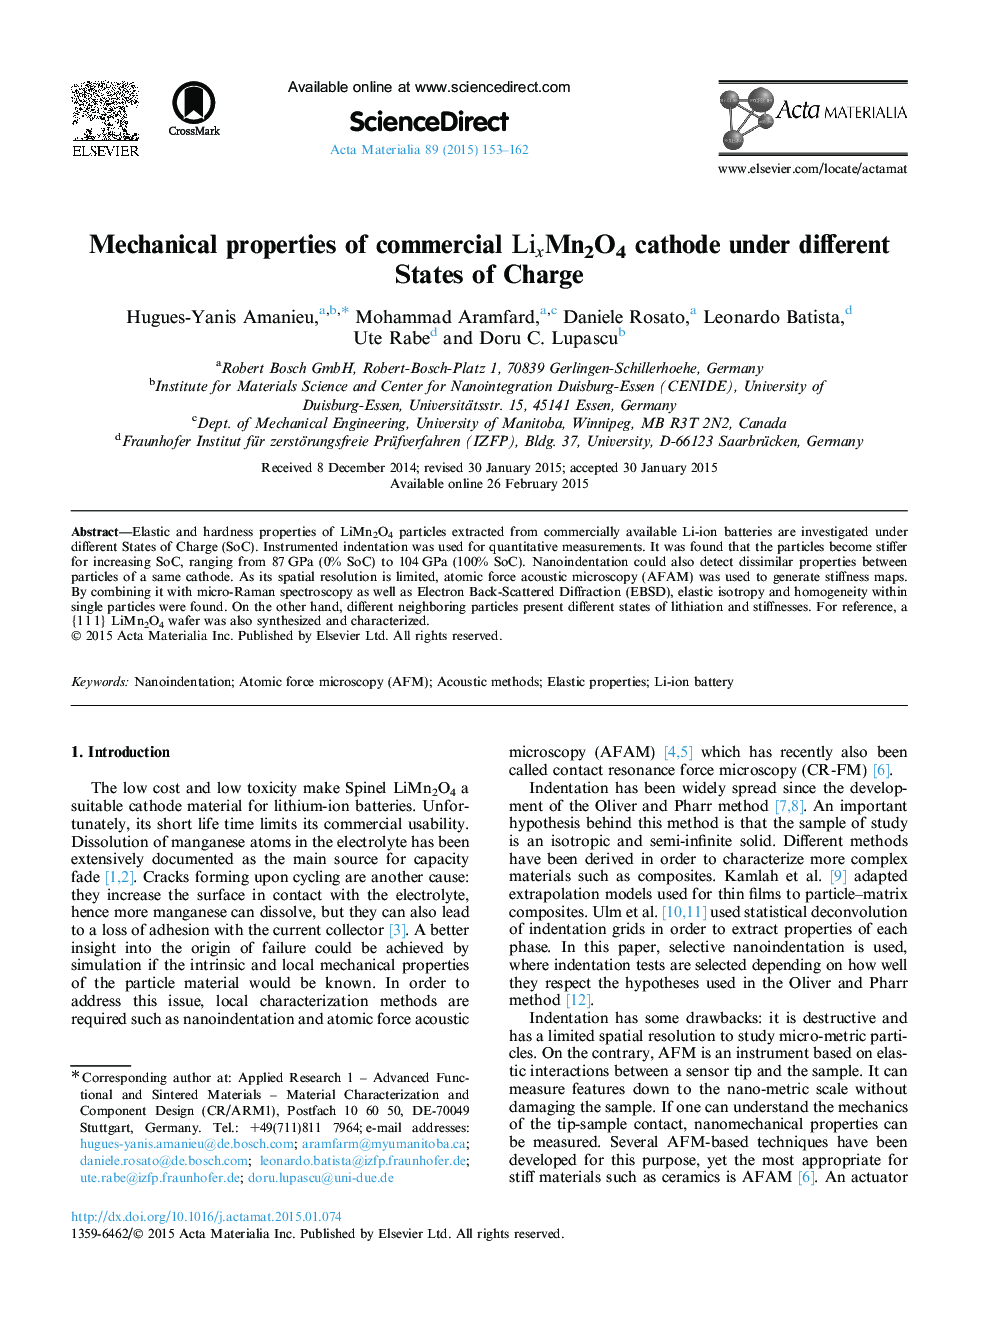 Mechanical properties of commercial LixMn2O4 cathode under different States of Charge